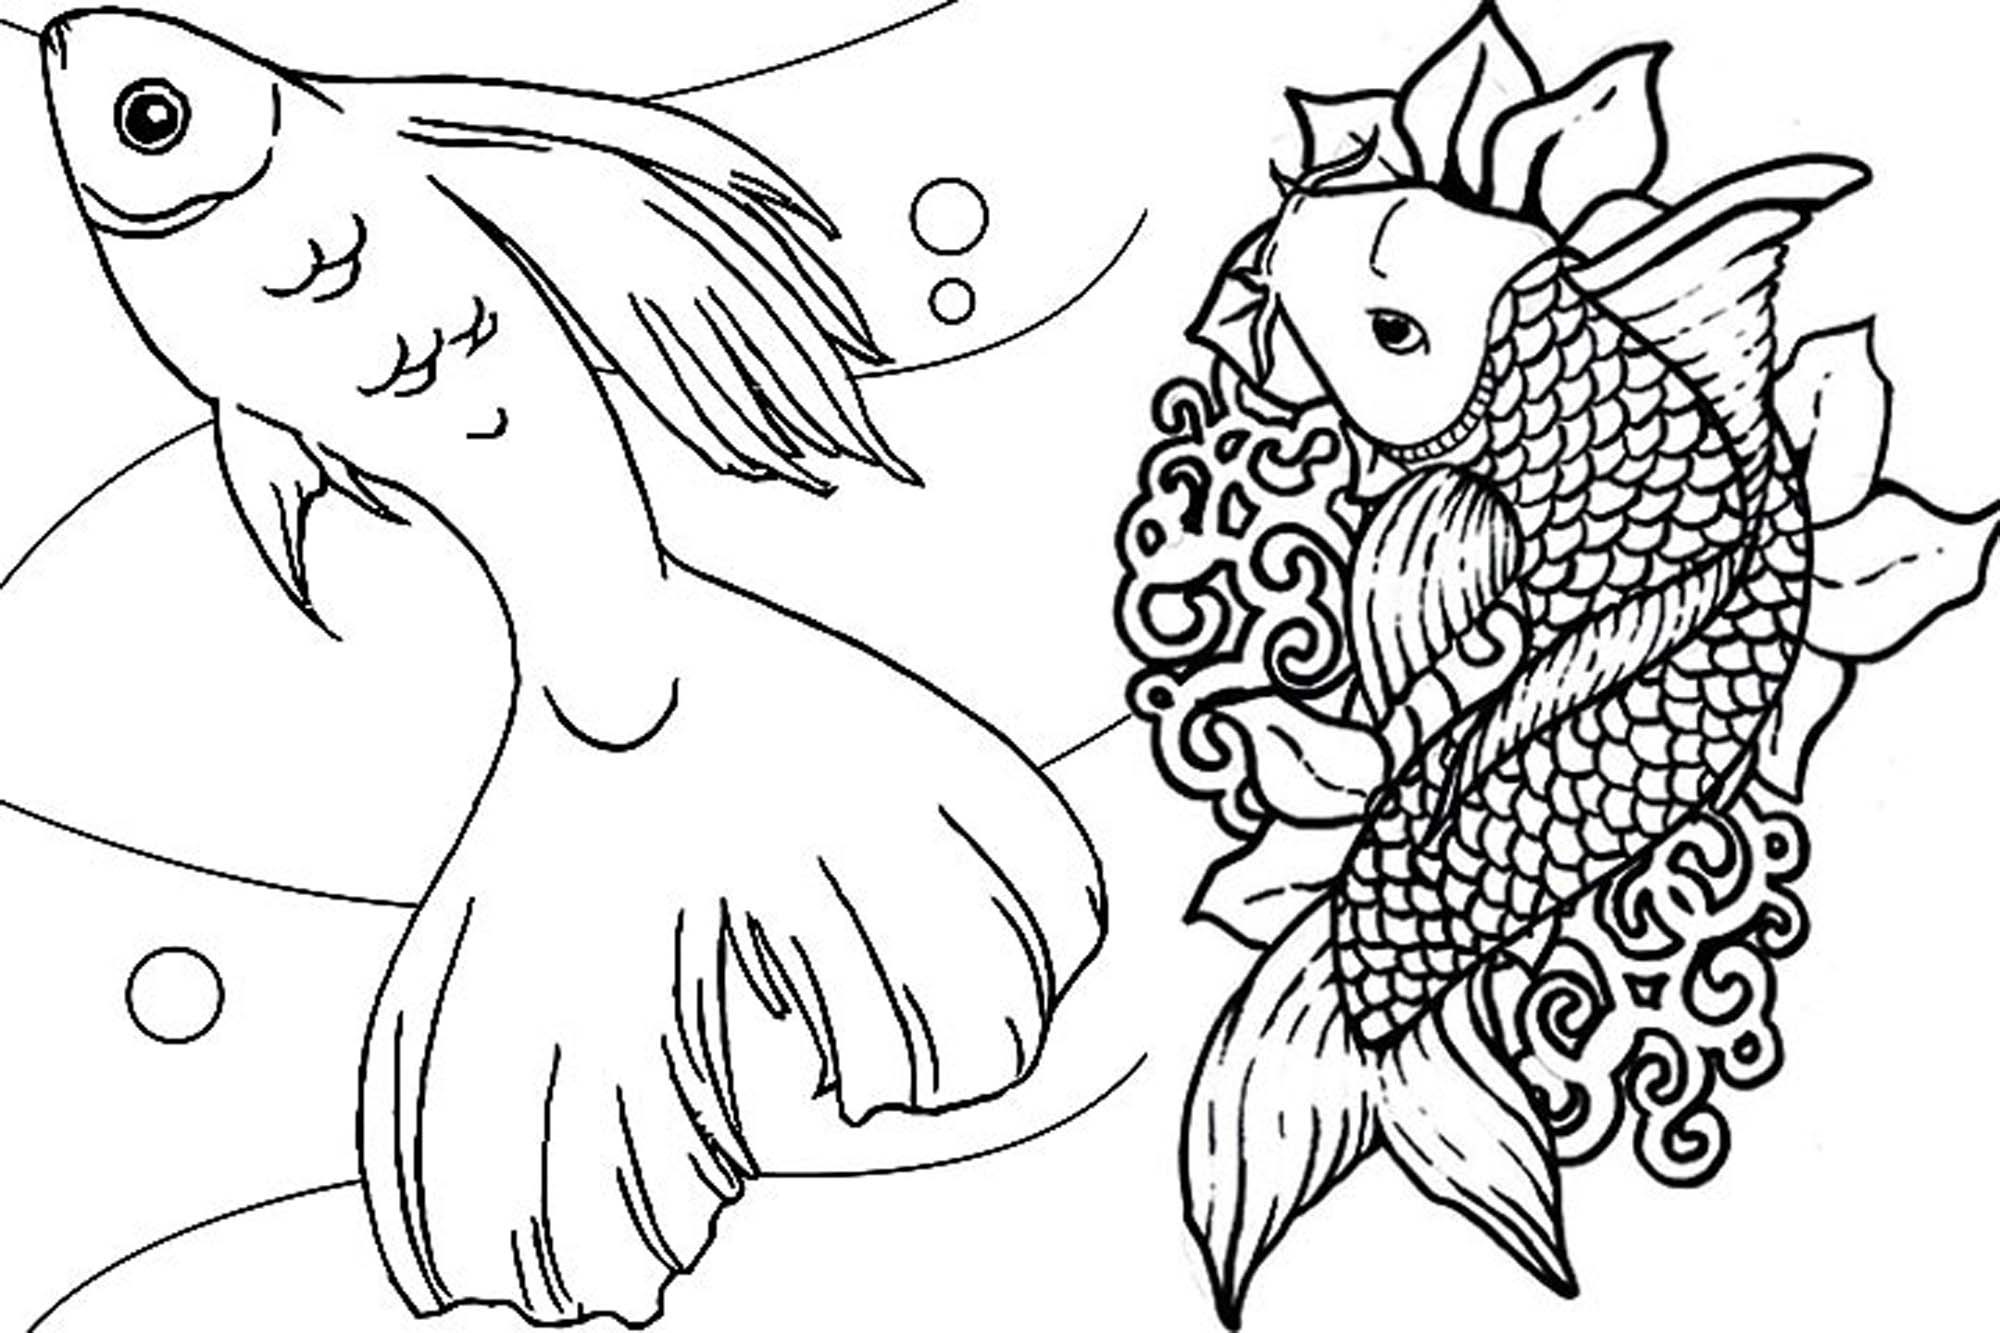 Coloring page with tropical fish